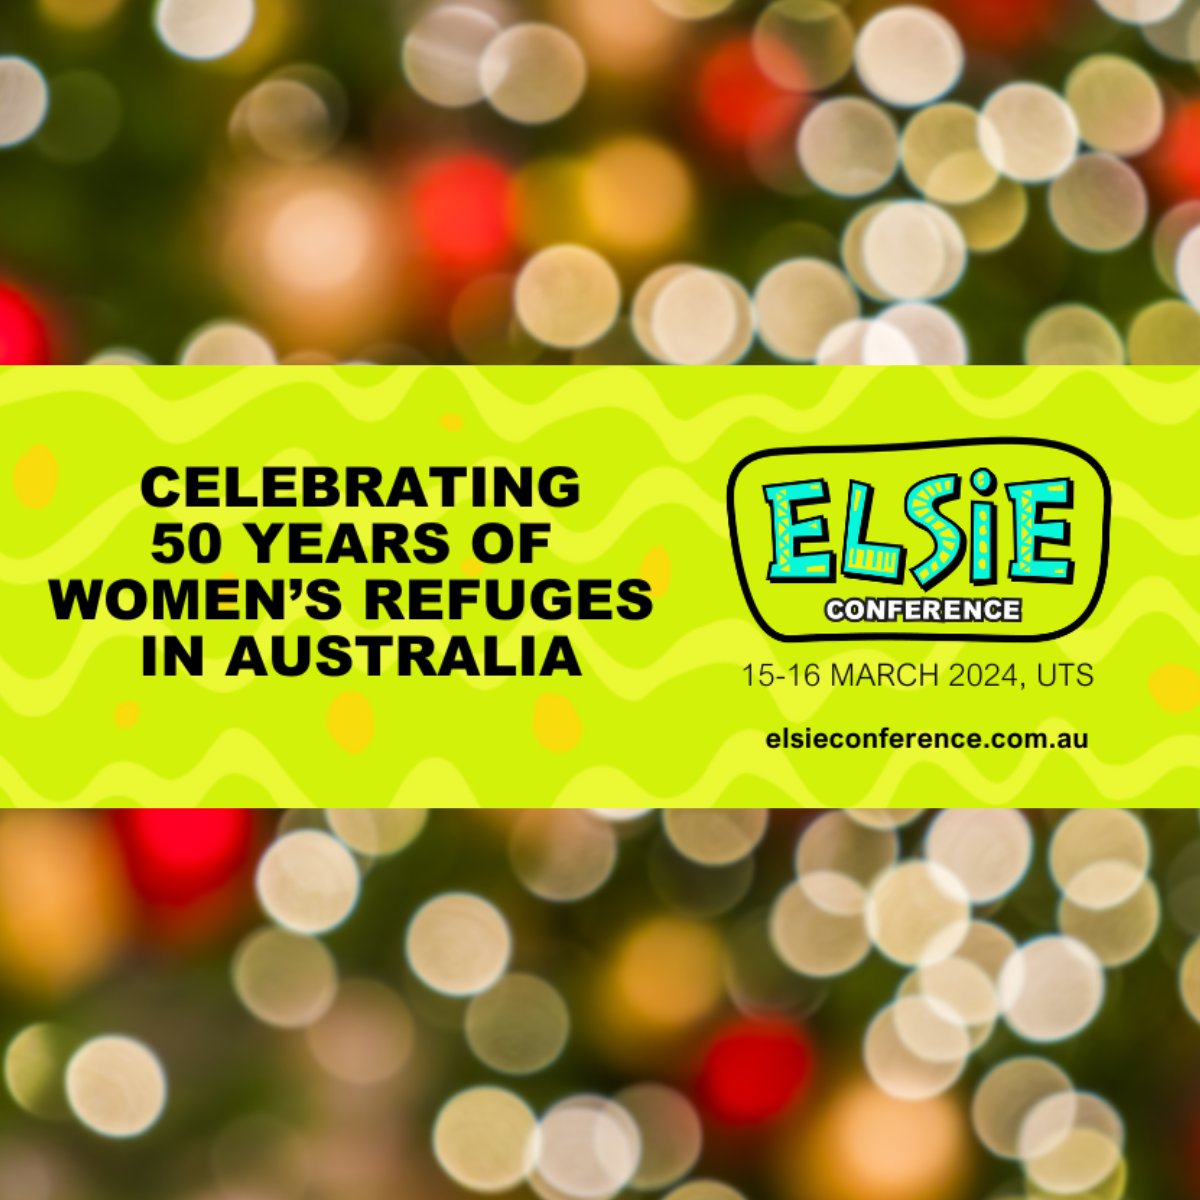 Spread the Christmas cheer. If you have the means make a 'pay it forward' donation for a refuge worker to attend the Elsie Conference. 🎄 elsieconference.com.au